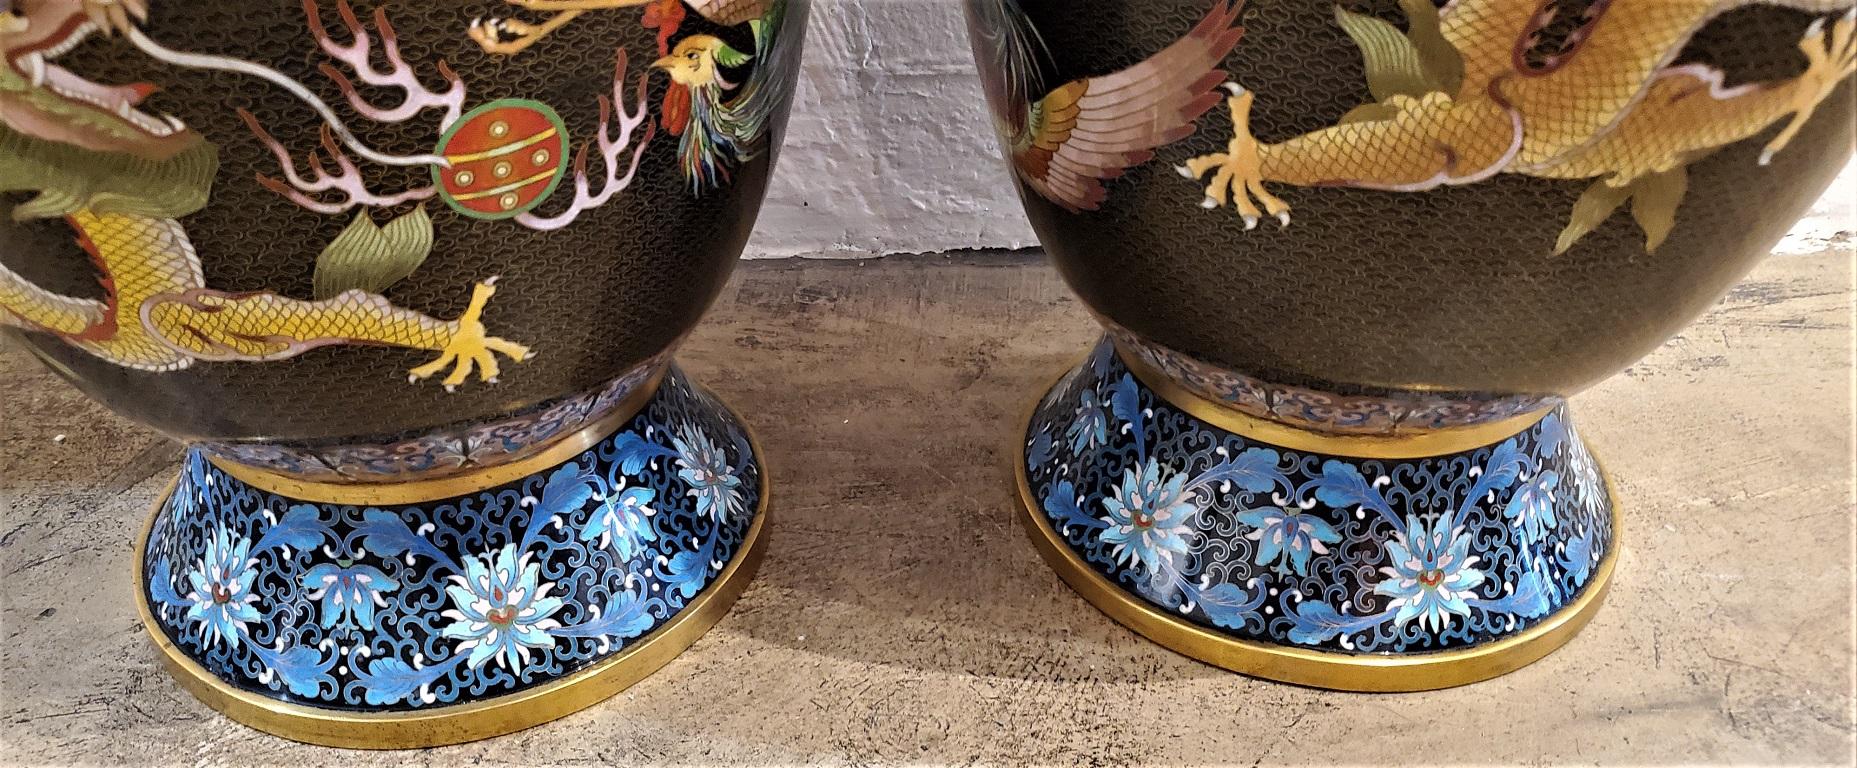 Pair of Large Chinese Bronze Cloisonné Dragon and Phoenix Vases 5